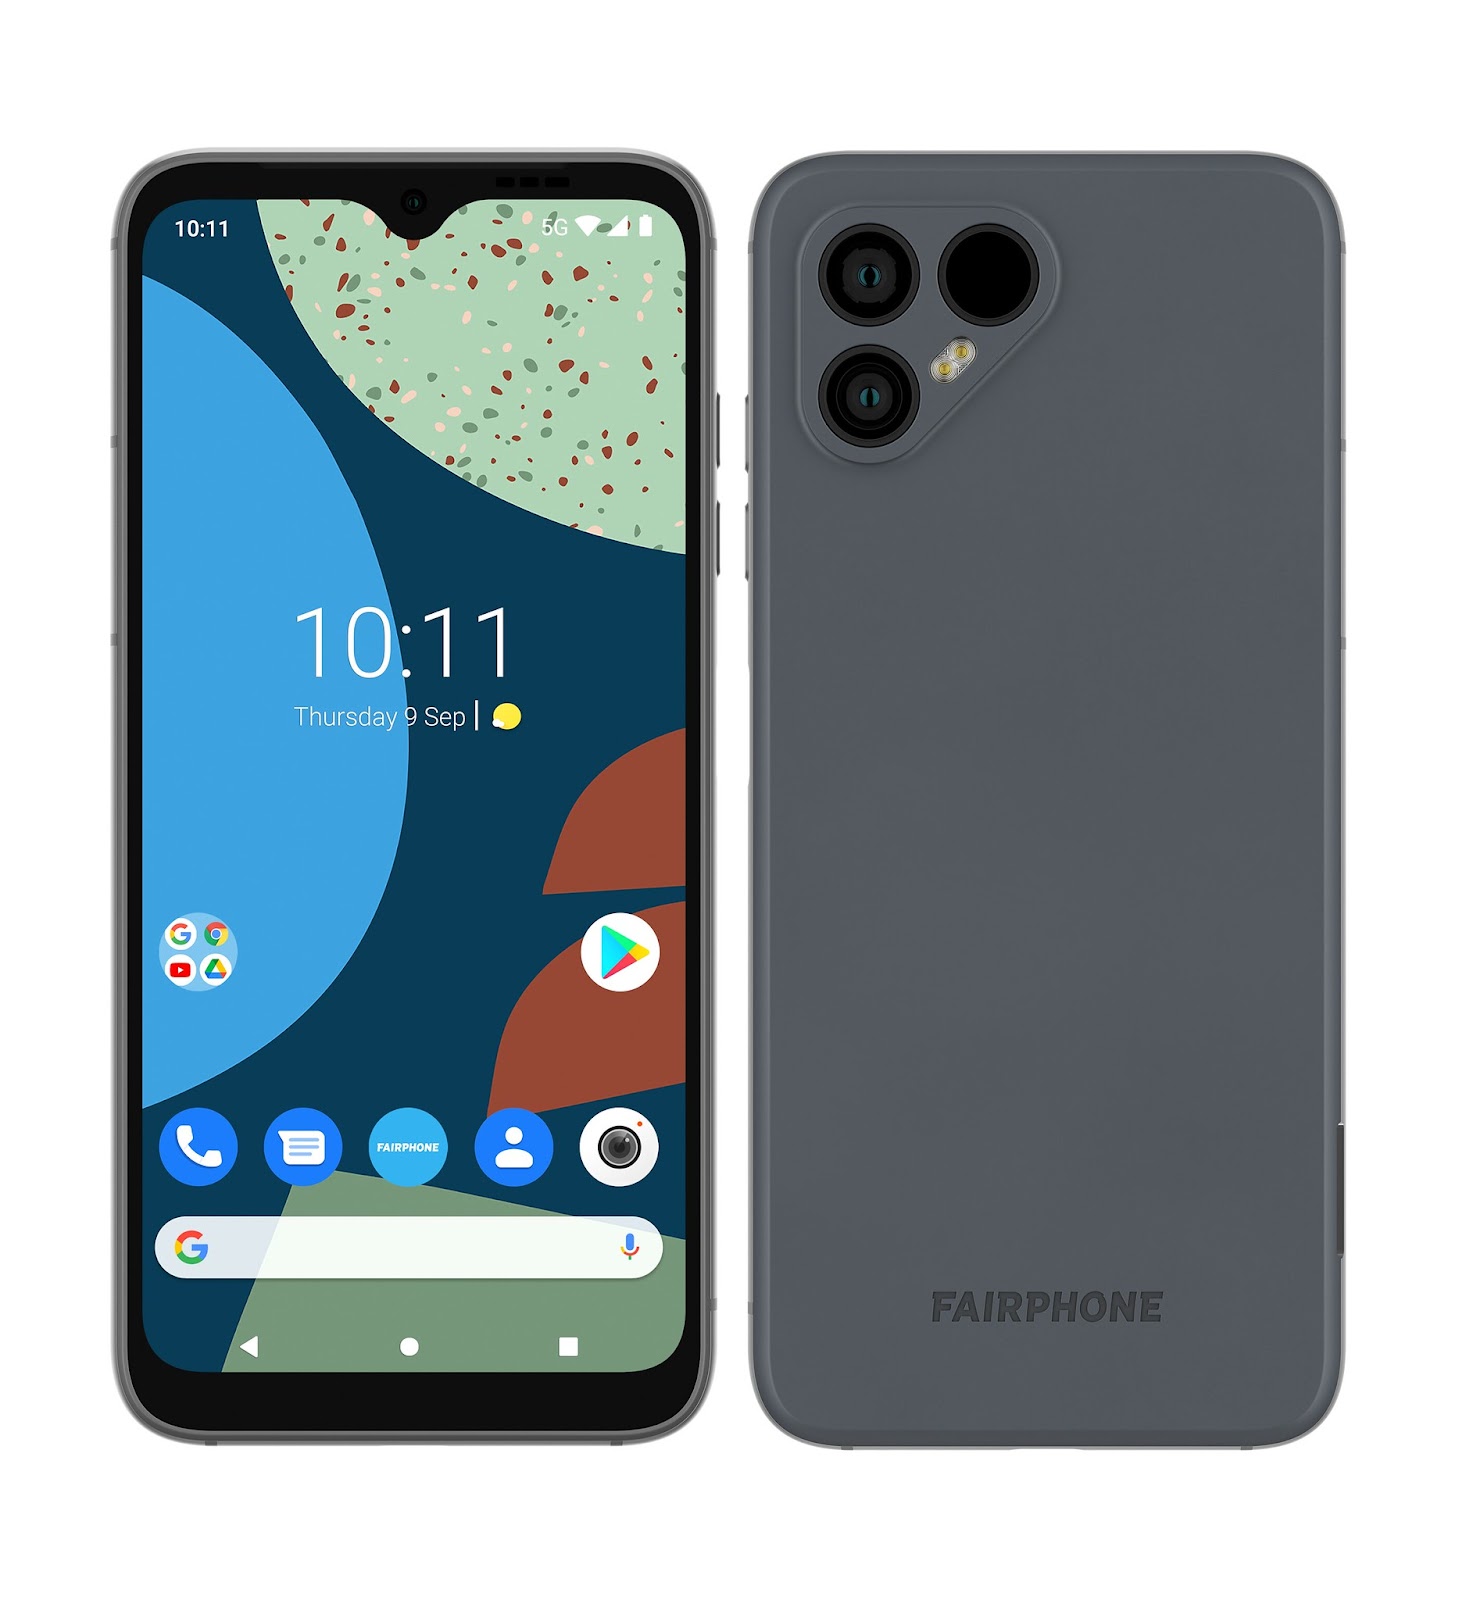 Fairphone_4_foto https://creativecommons.org/licenses/by-sa/2.0/